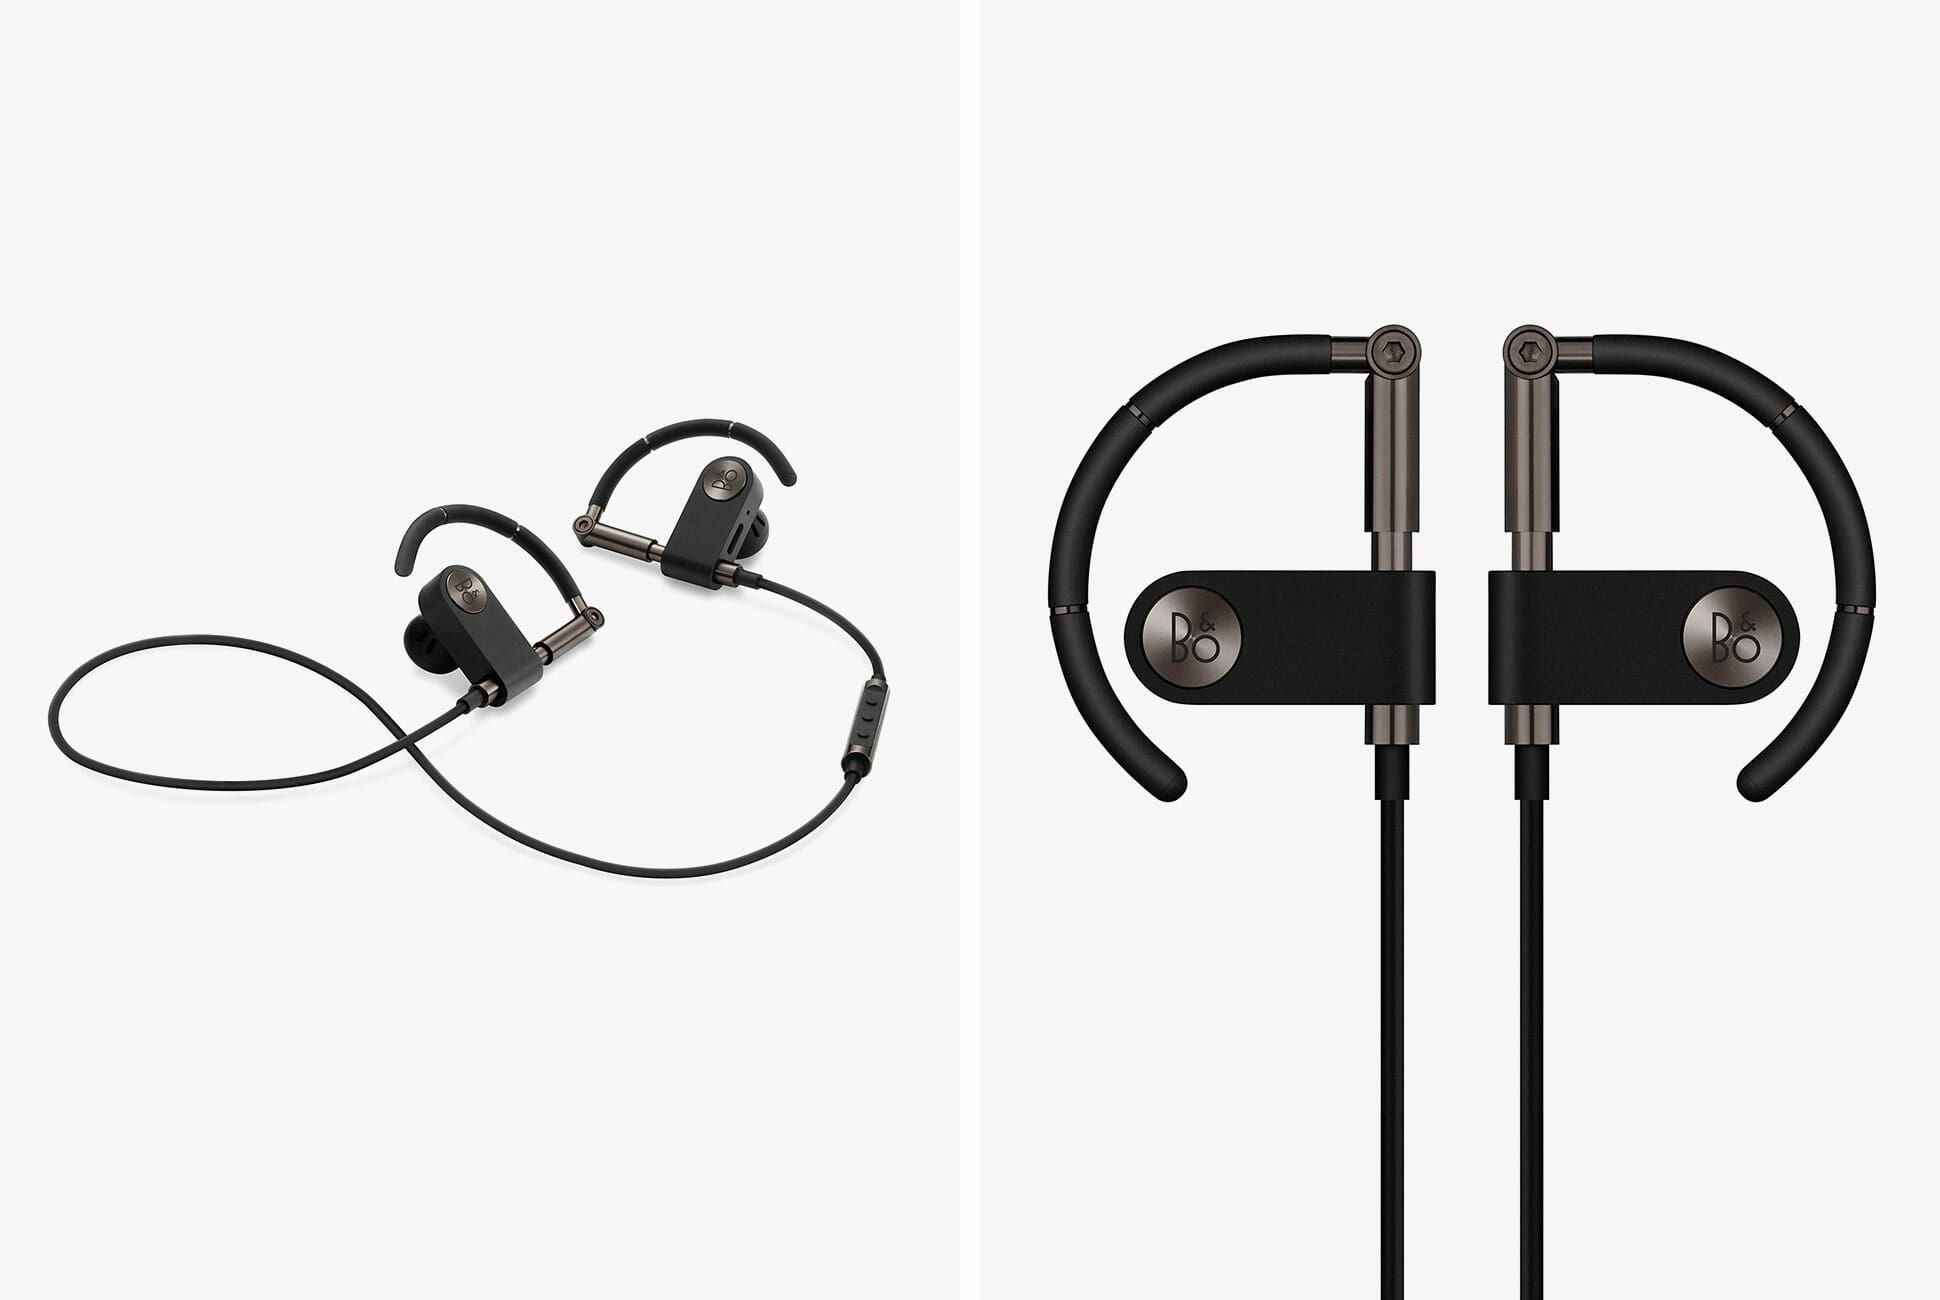 Bang & Olufsen's Wireless Earphones Blend Iconic Design with